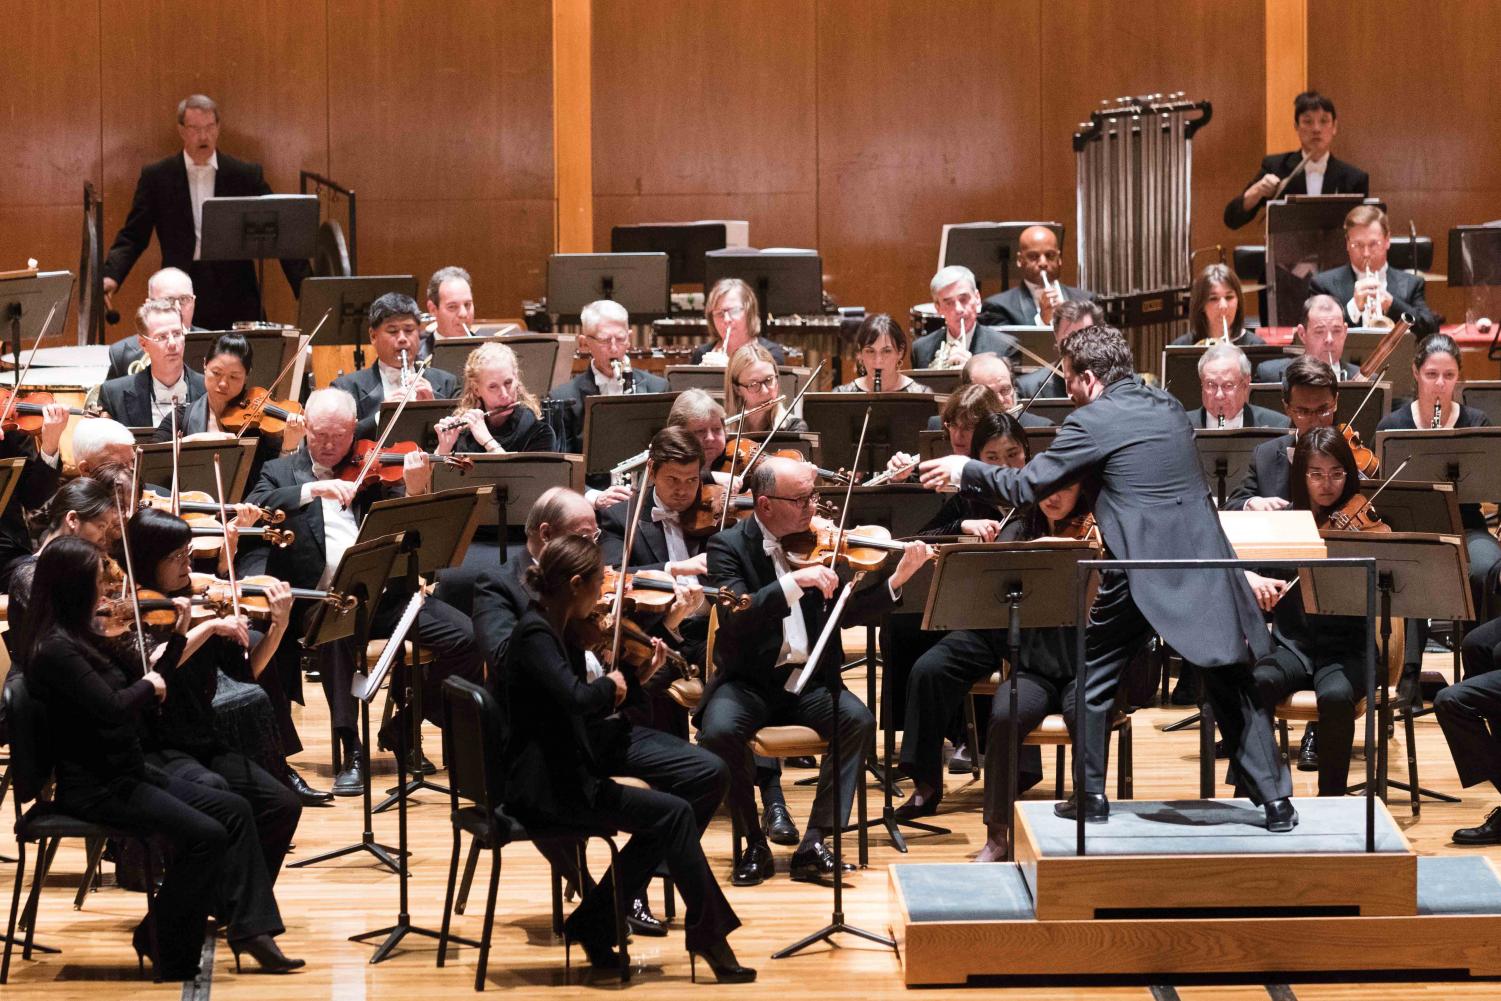 Chicago Symphony Orchestra plays soldout show The Daily Illini